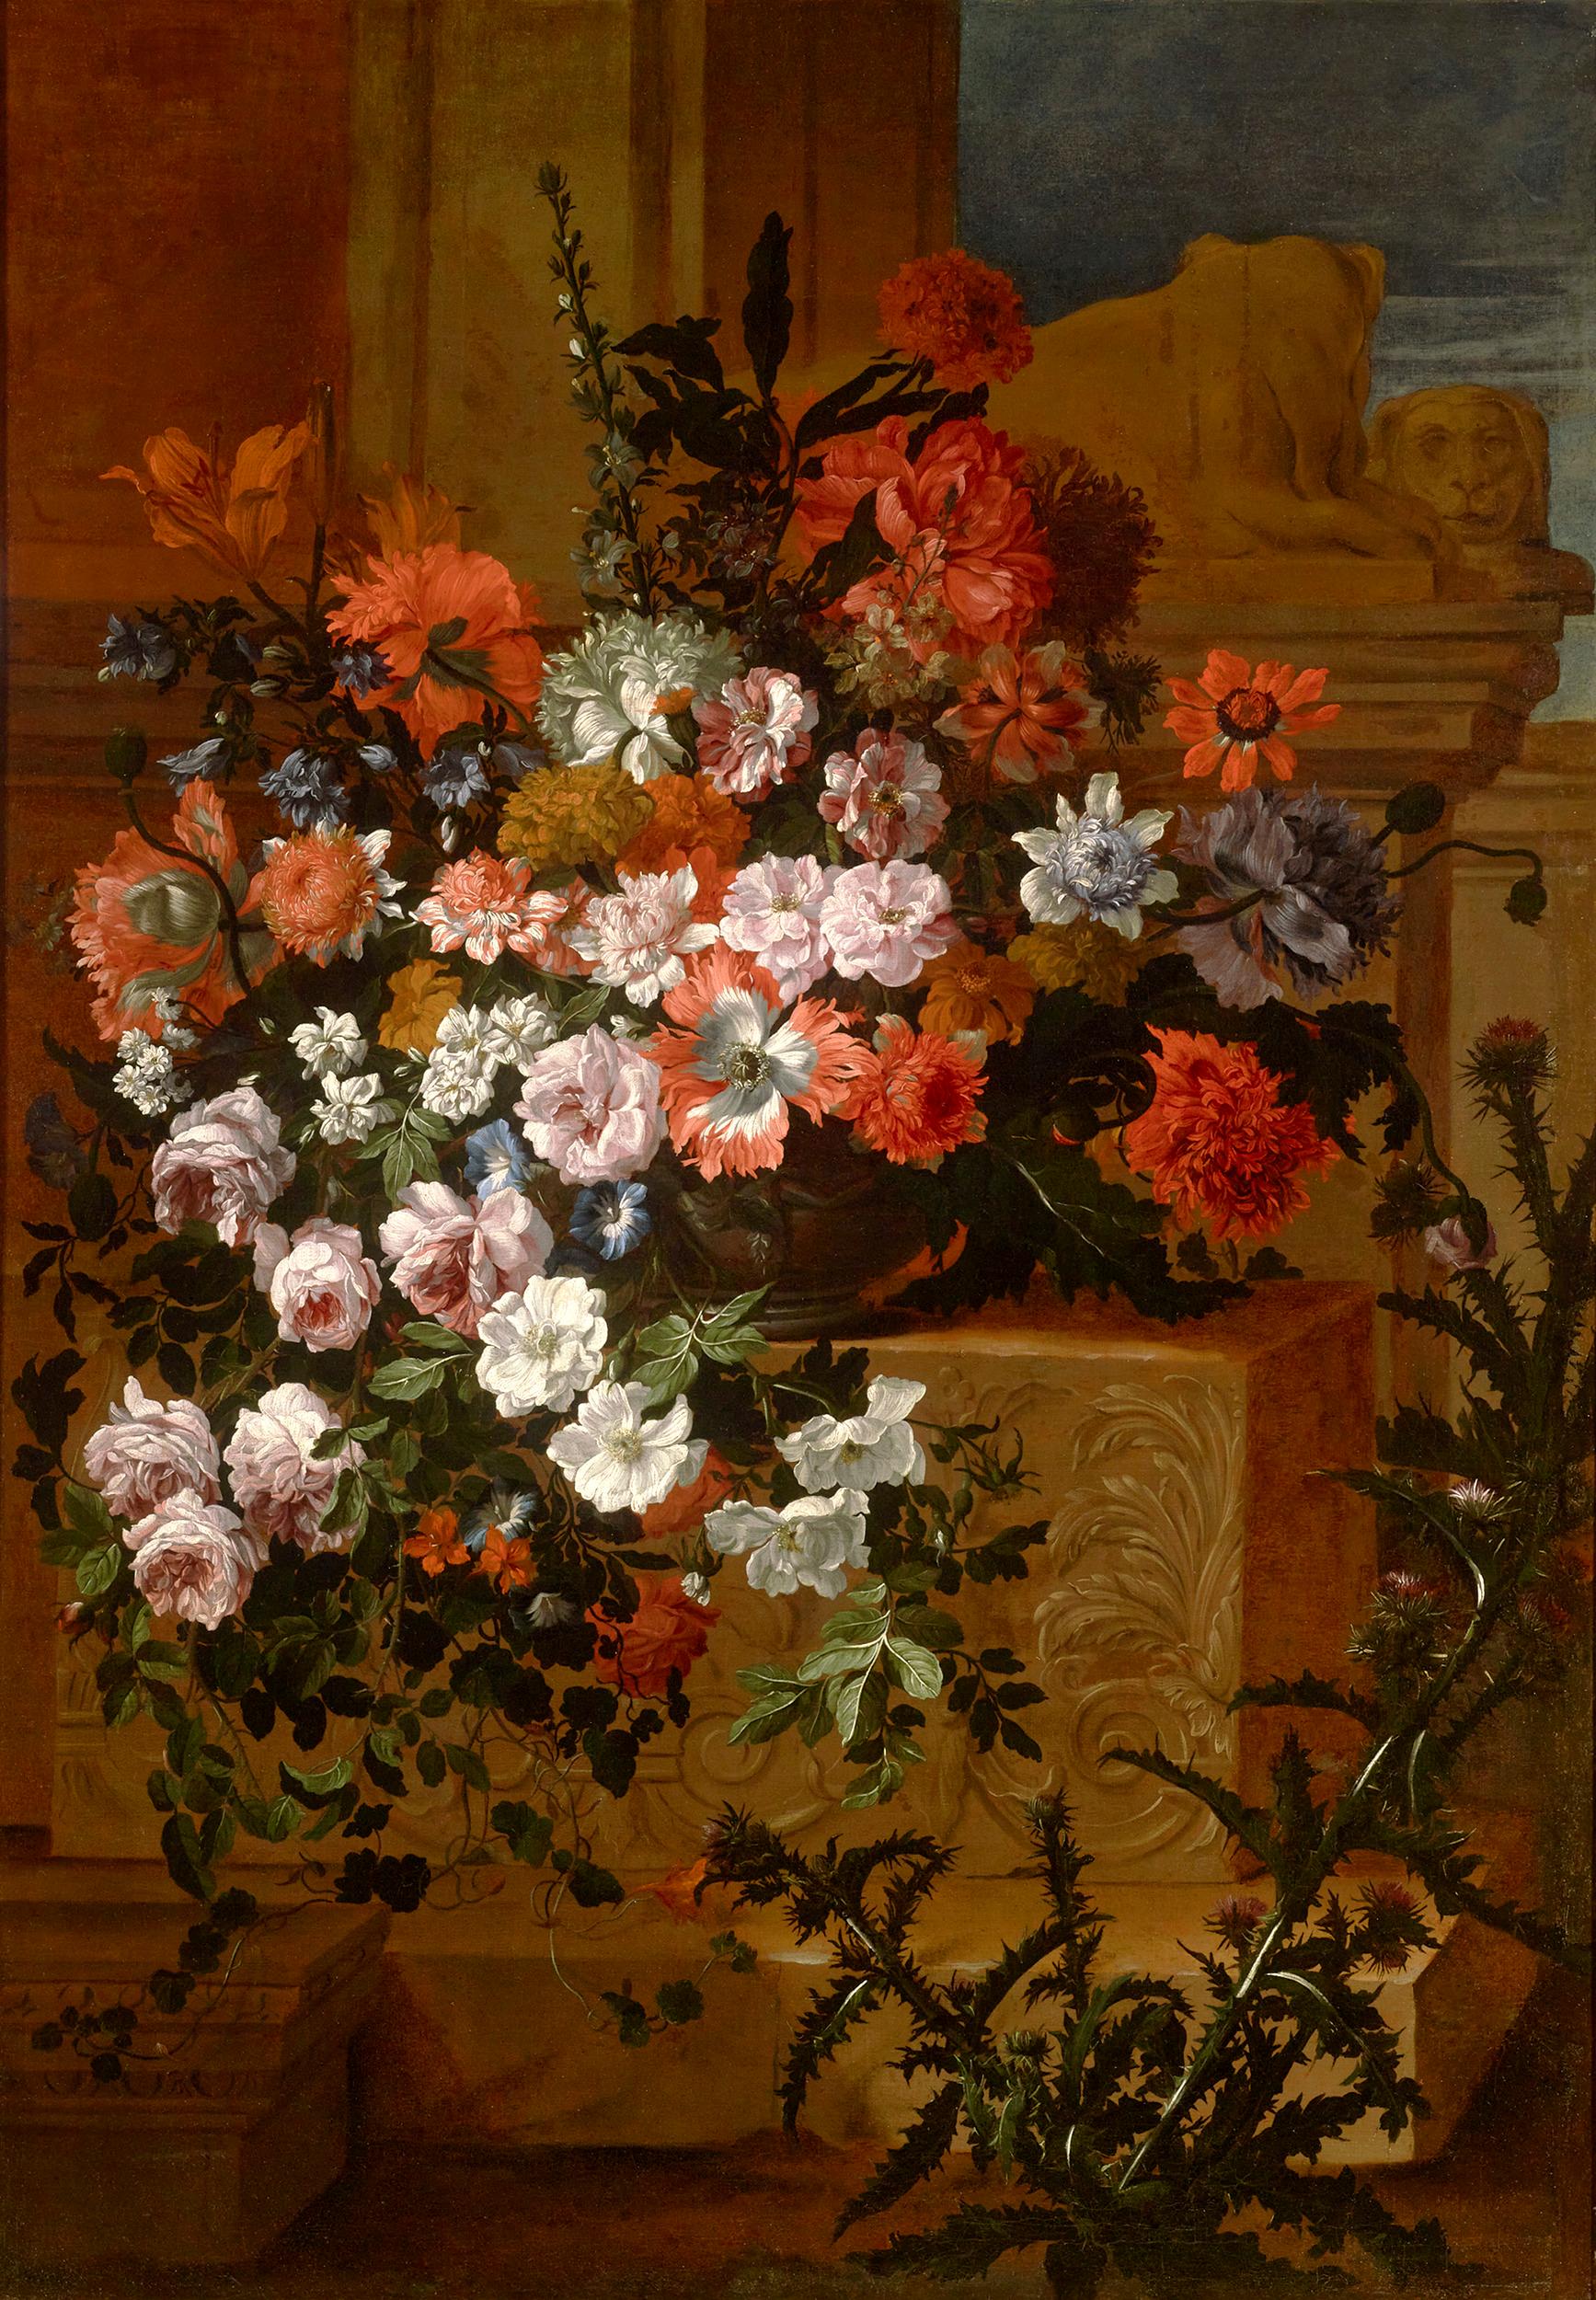 Jean-Baptiste Monnoyer
1636-1699  French

Still Life with Flowers on a Carved Stone Ledge

Oil on canvas

Impeccable detail and luminous color breathe life into this floral still life by the French artist Jean-Baptiste Monnoyer. Trained in Antwerp,